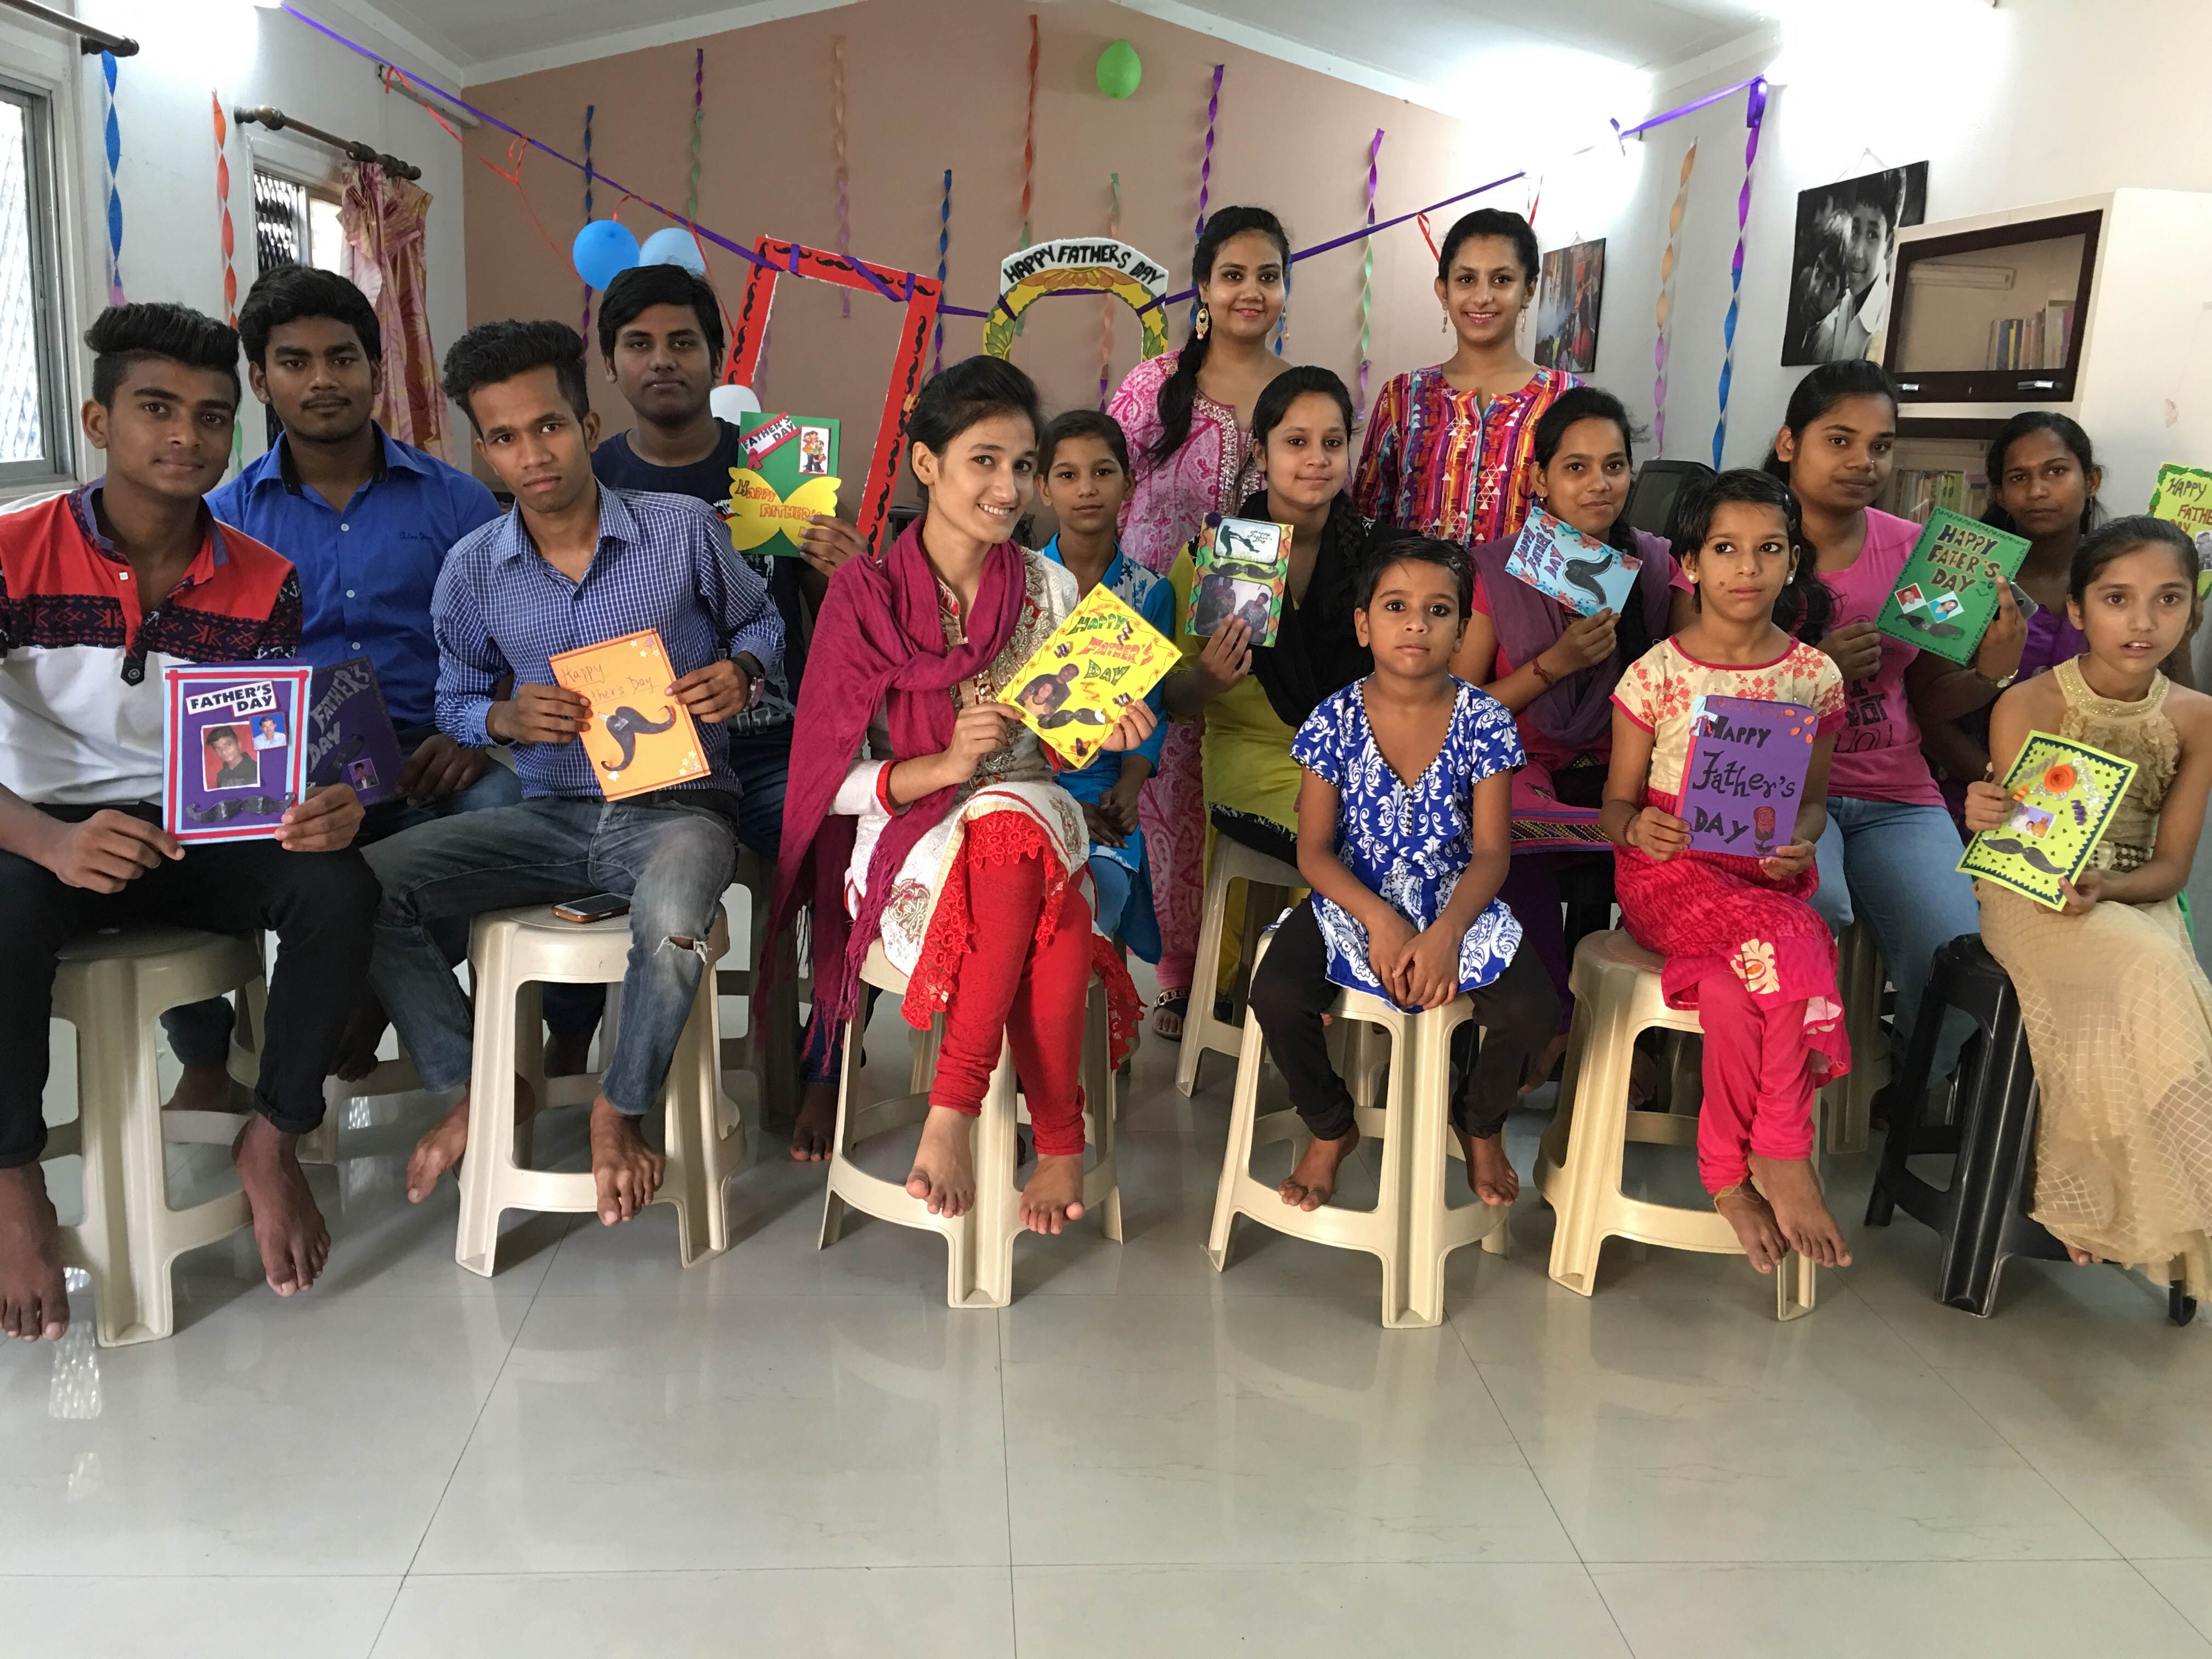 Children proudly showing off the cards they made for their fathers to show gratitude at Kanak Durga.